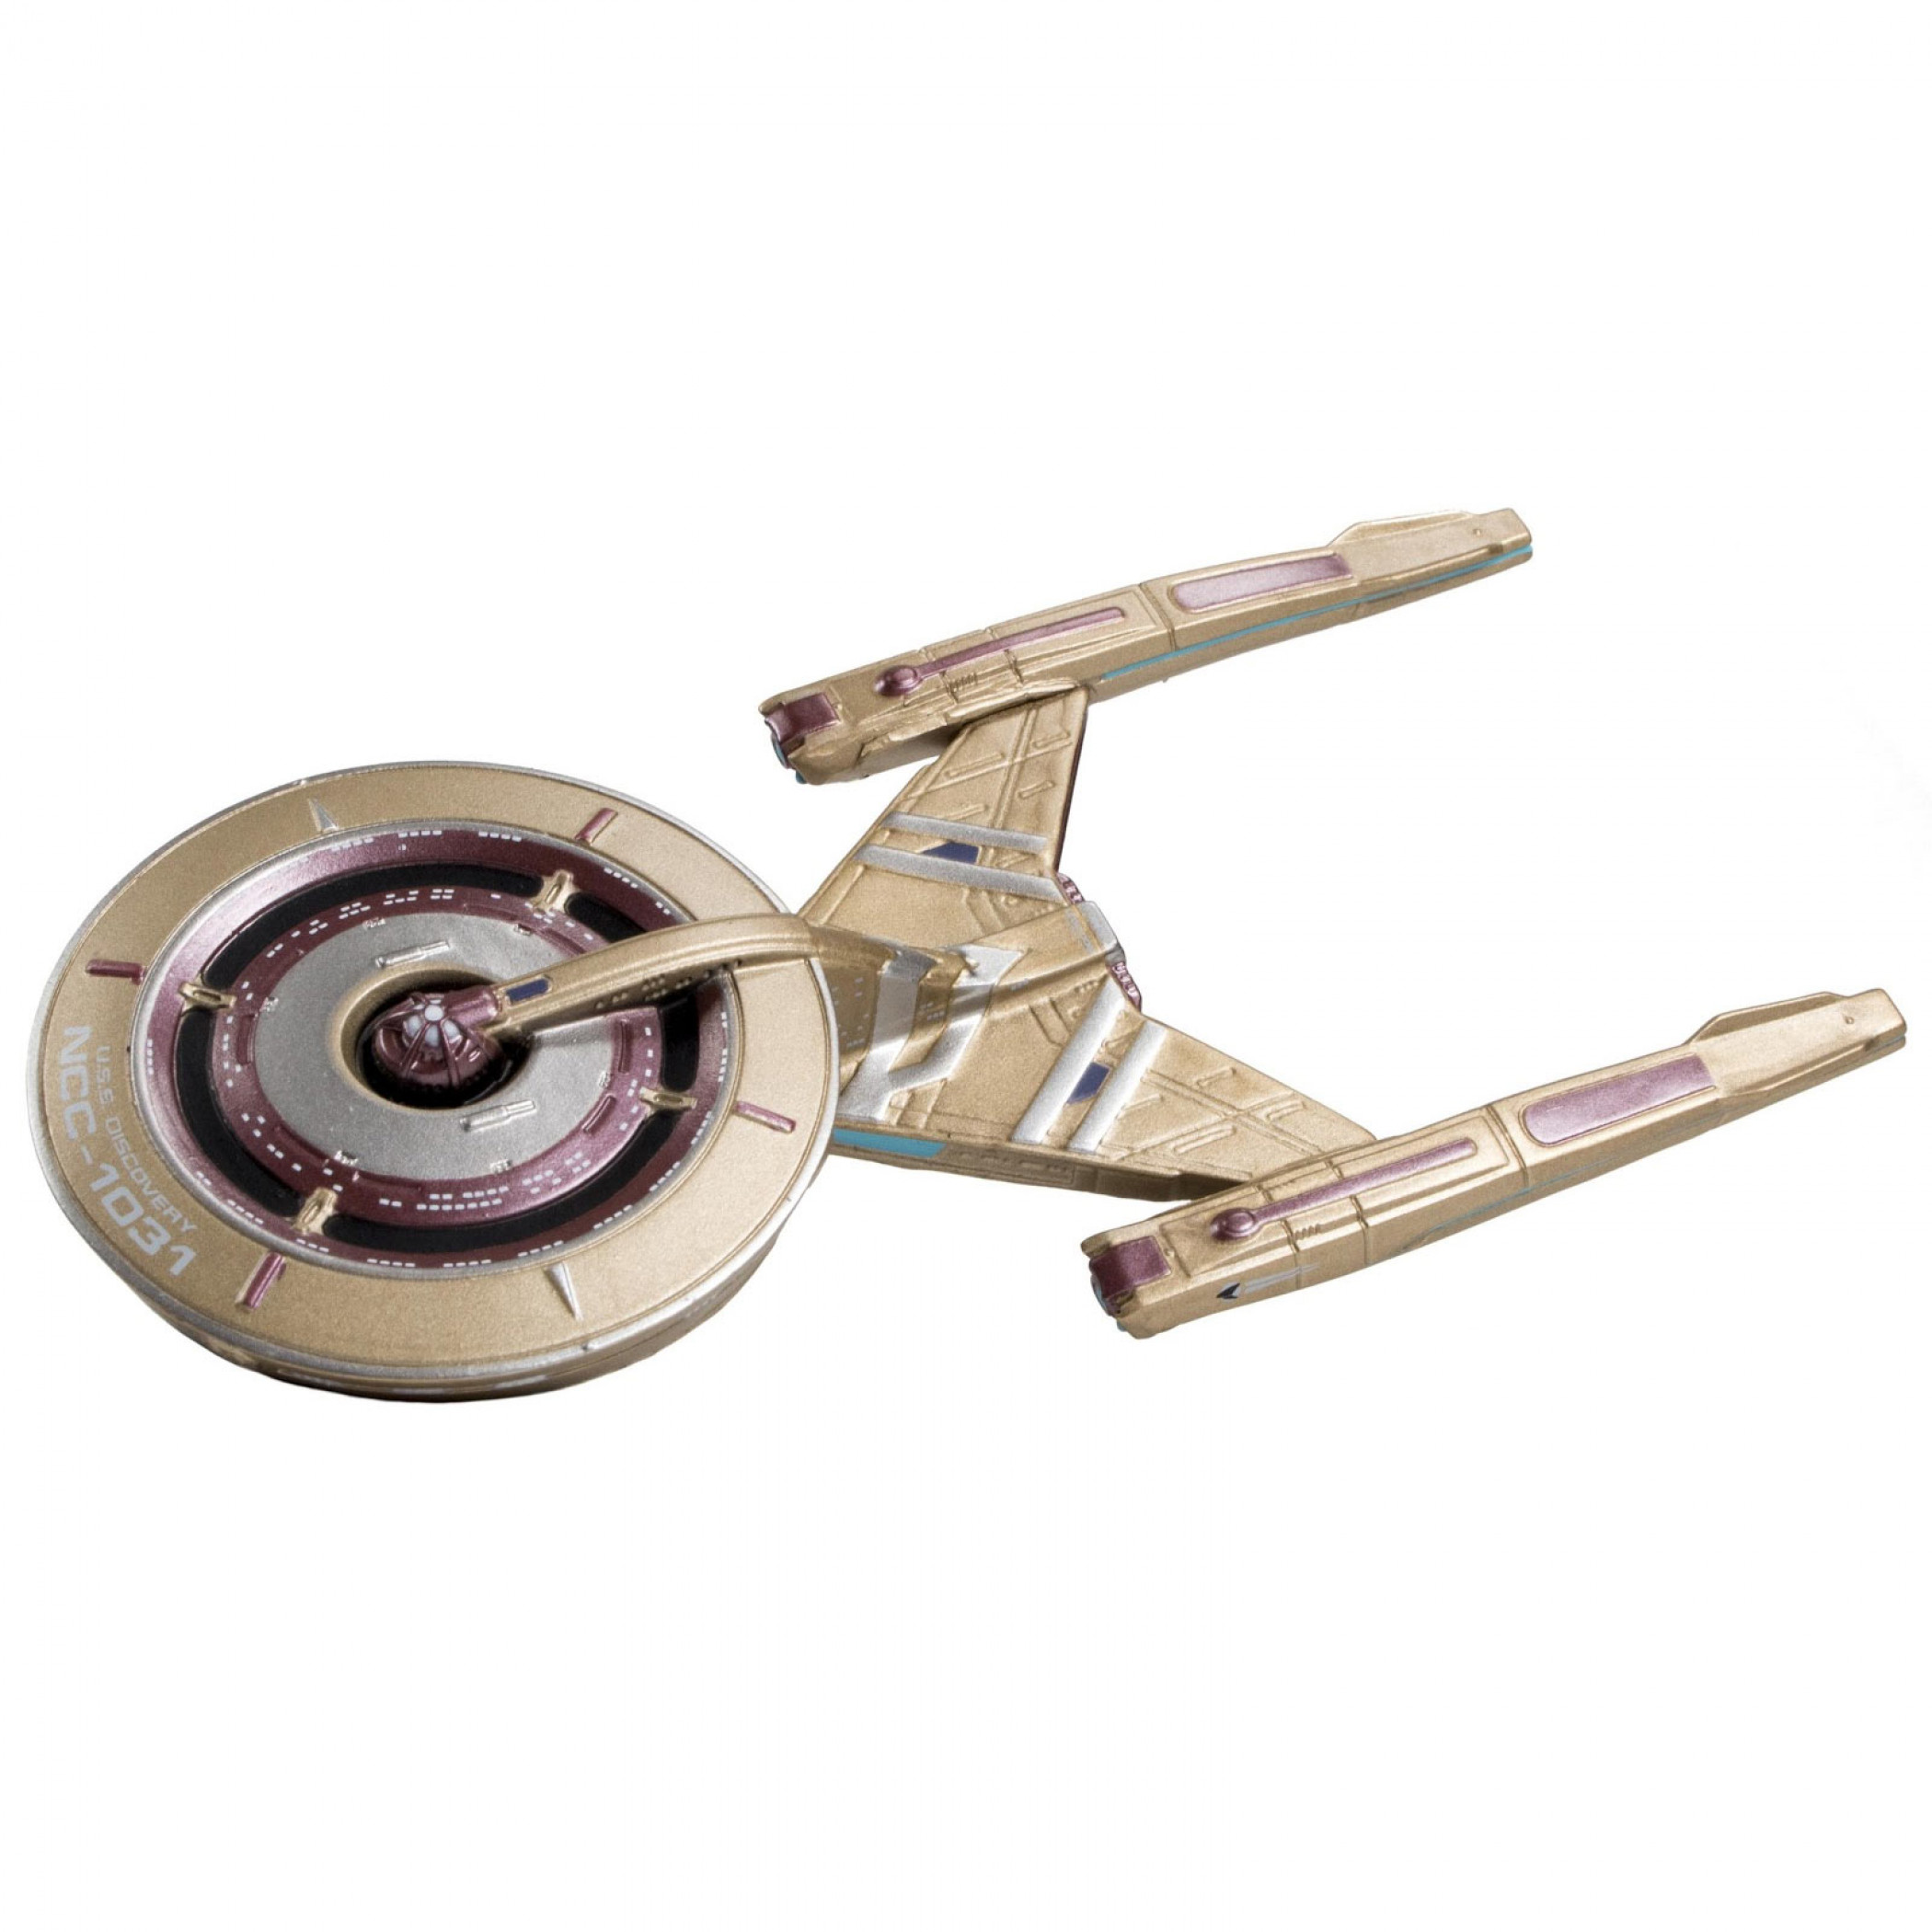 Star Trek Titans Discovery 4.5" U.S.S. Discovery Ncc-1031